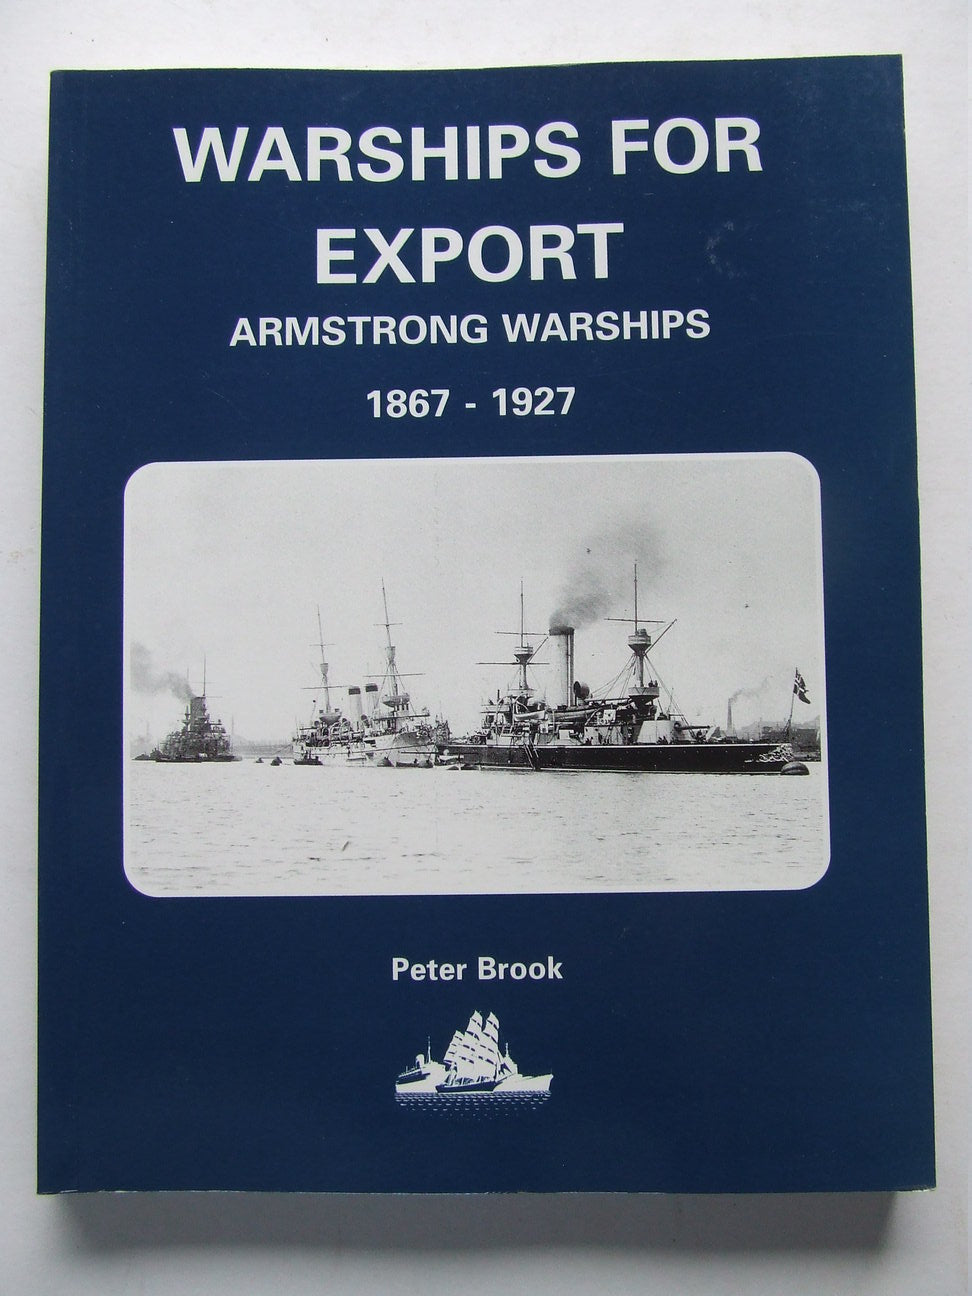 Warships for Export, Armstrong warships 1867-1927